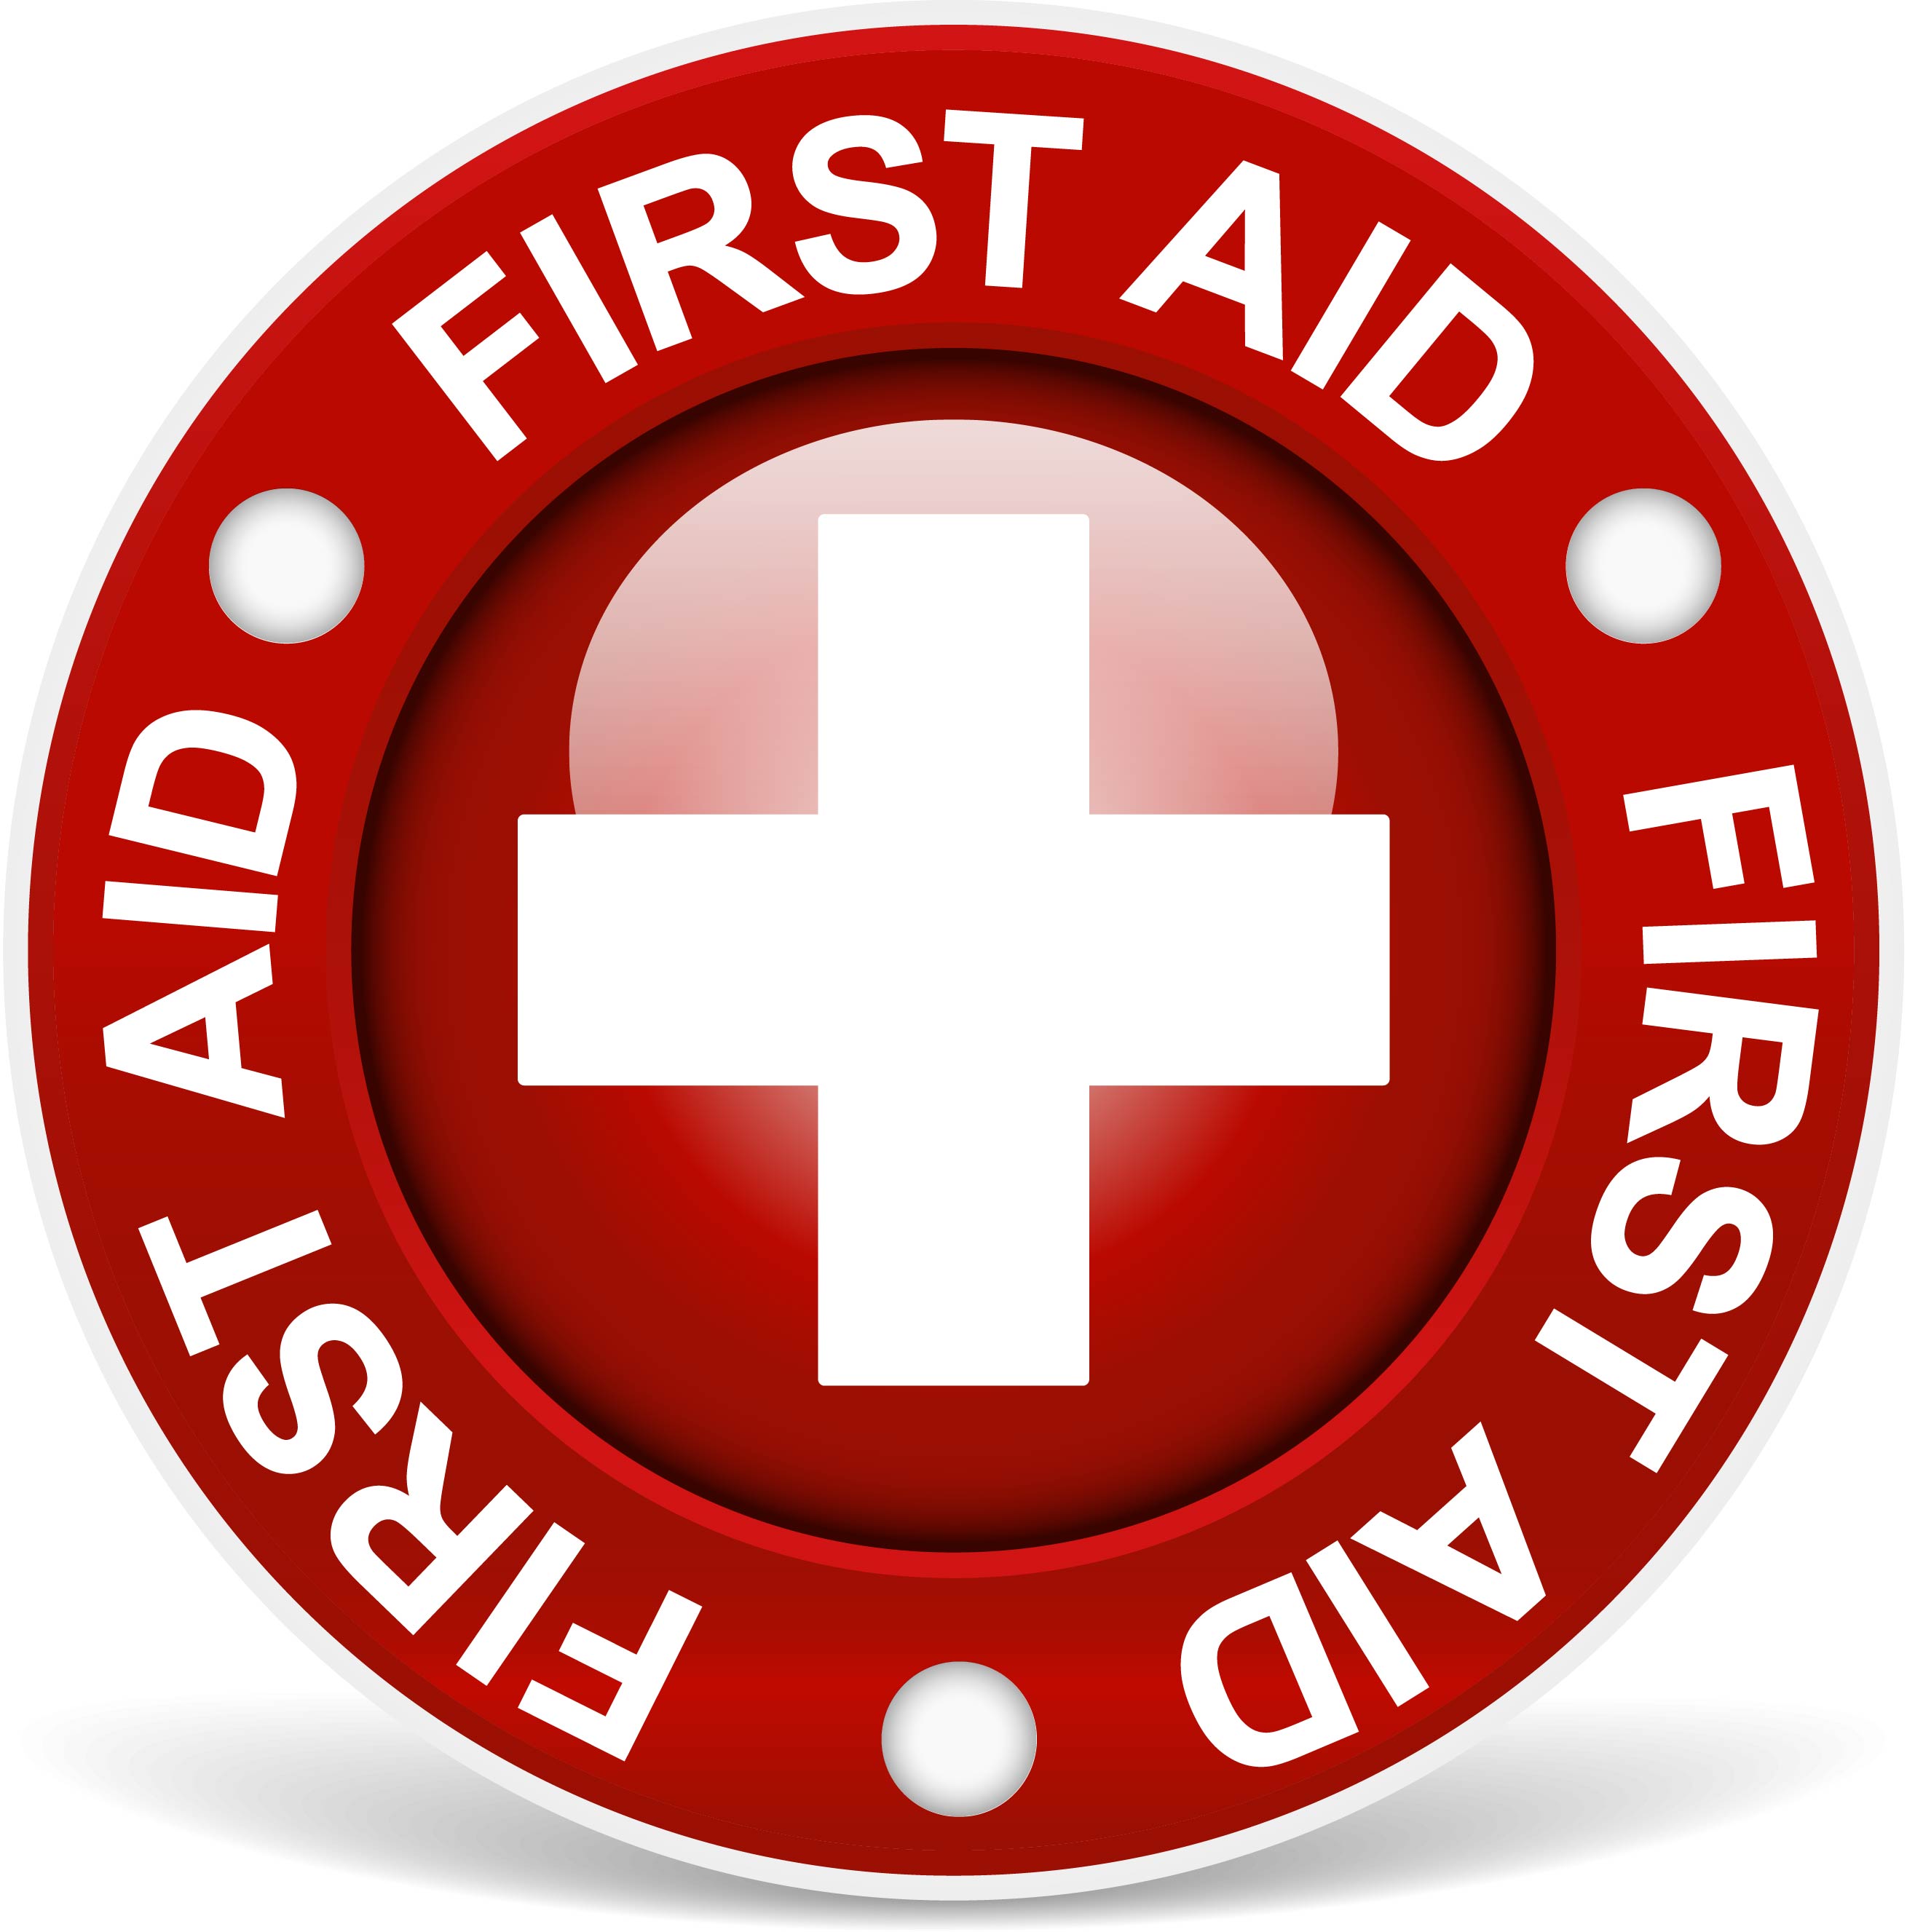 GDRC - First Aid Kit Checklist - FN69 XDS